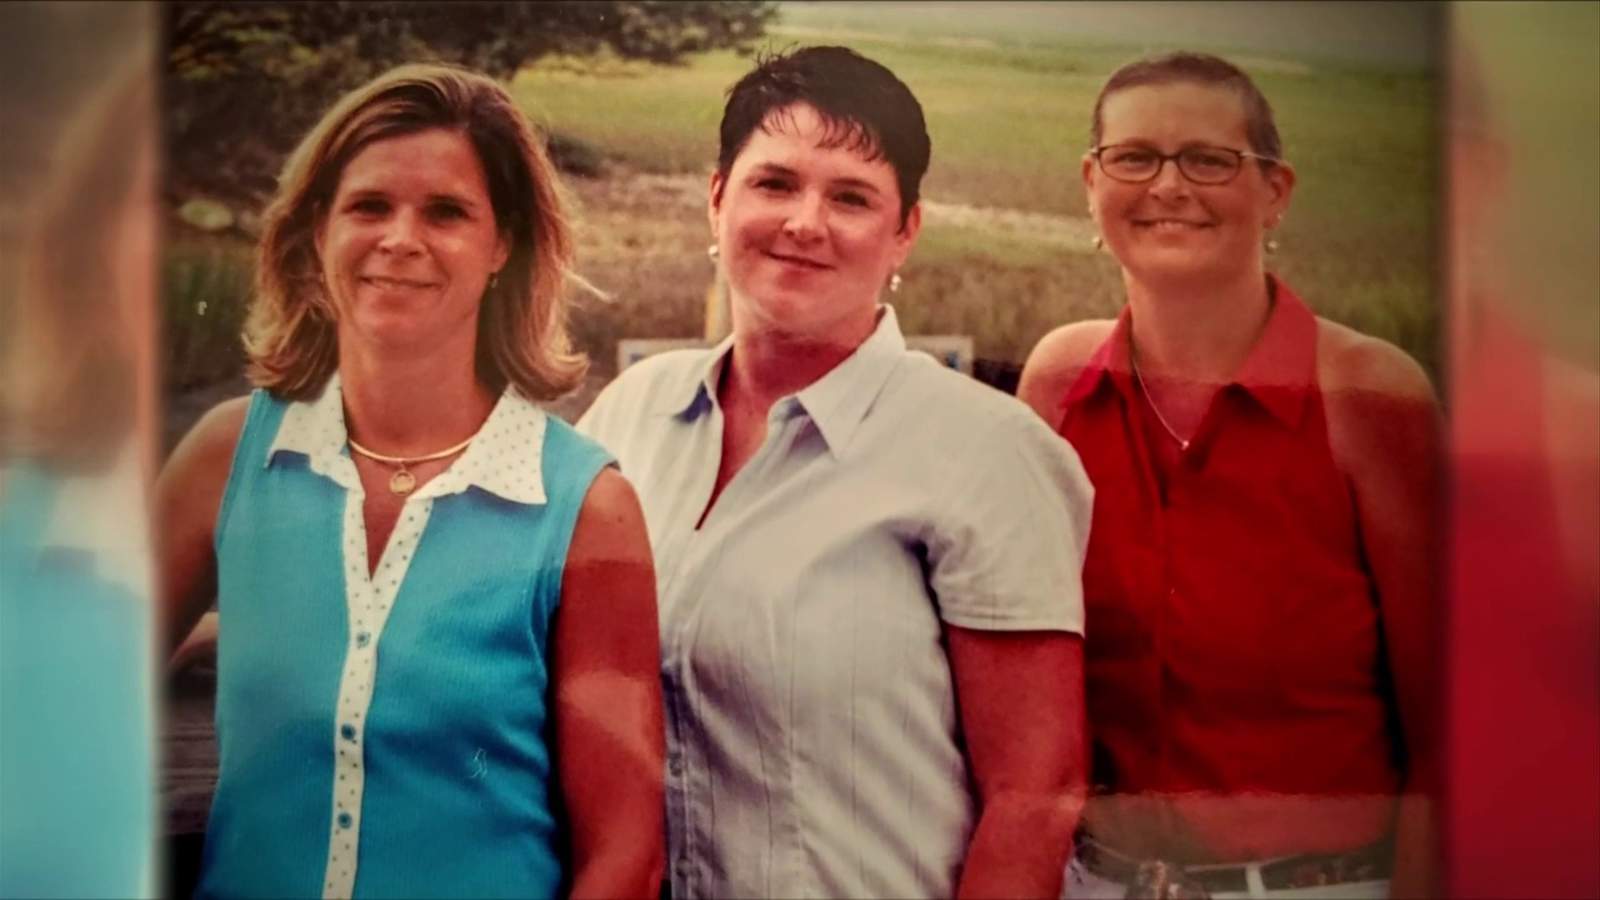 3 sisters, 3 breast cancer battles: Roanoke woman stresses importance of early detection